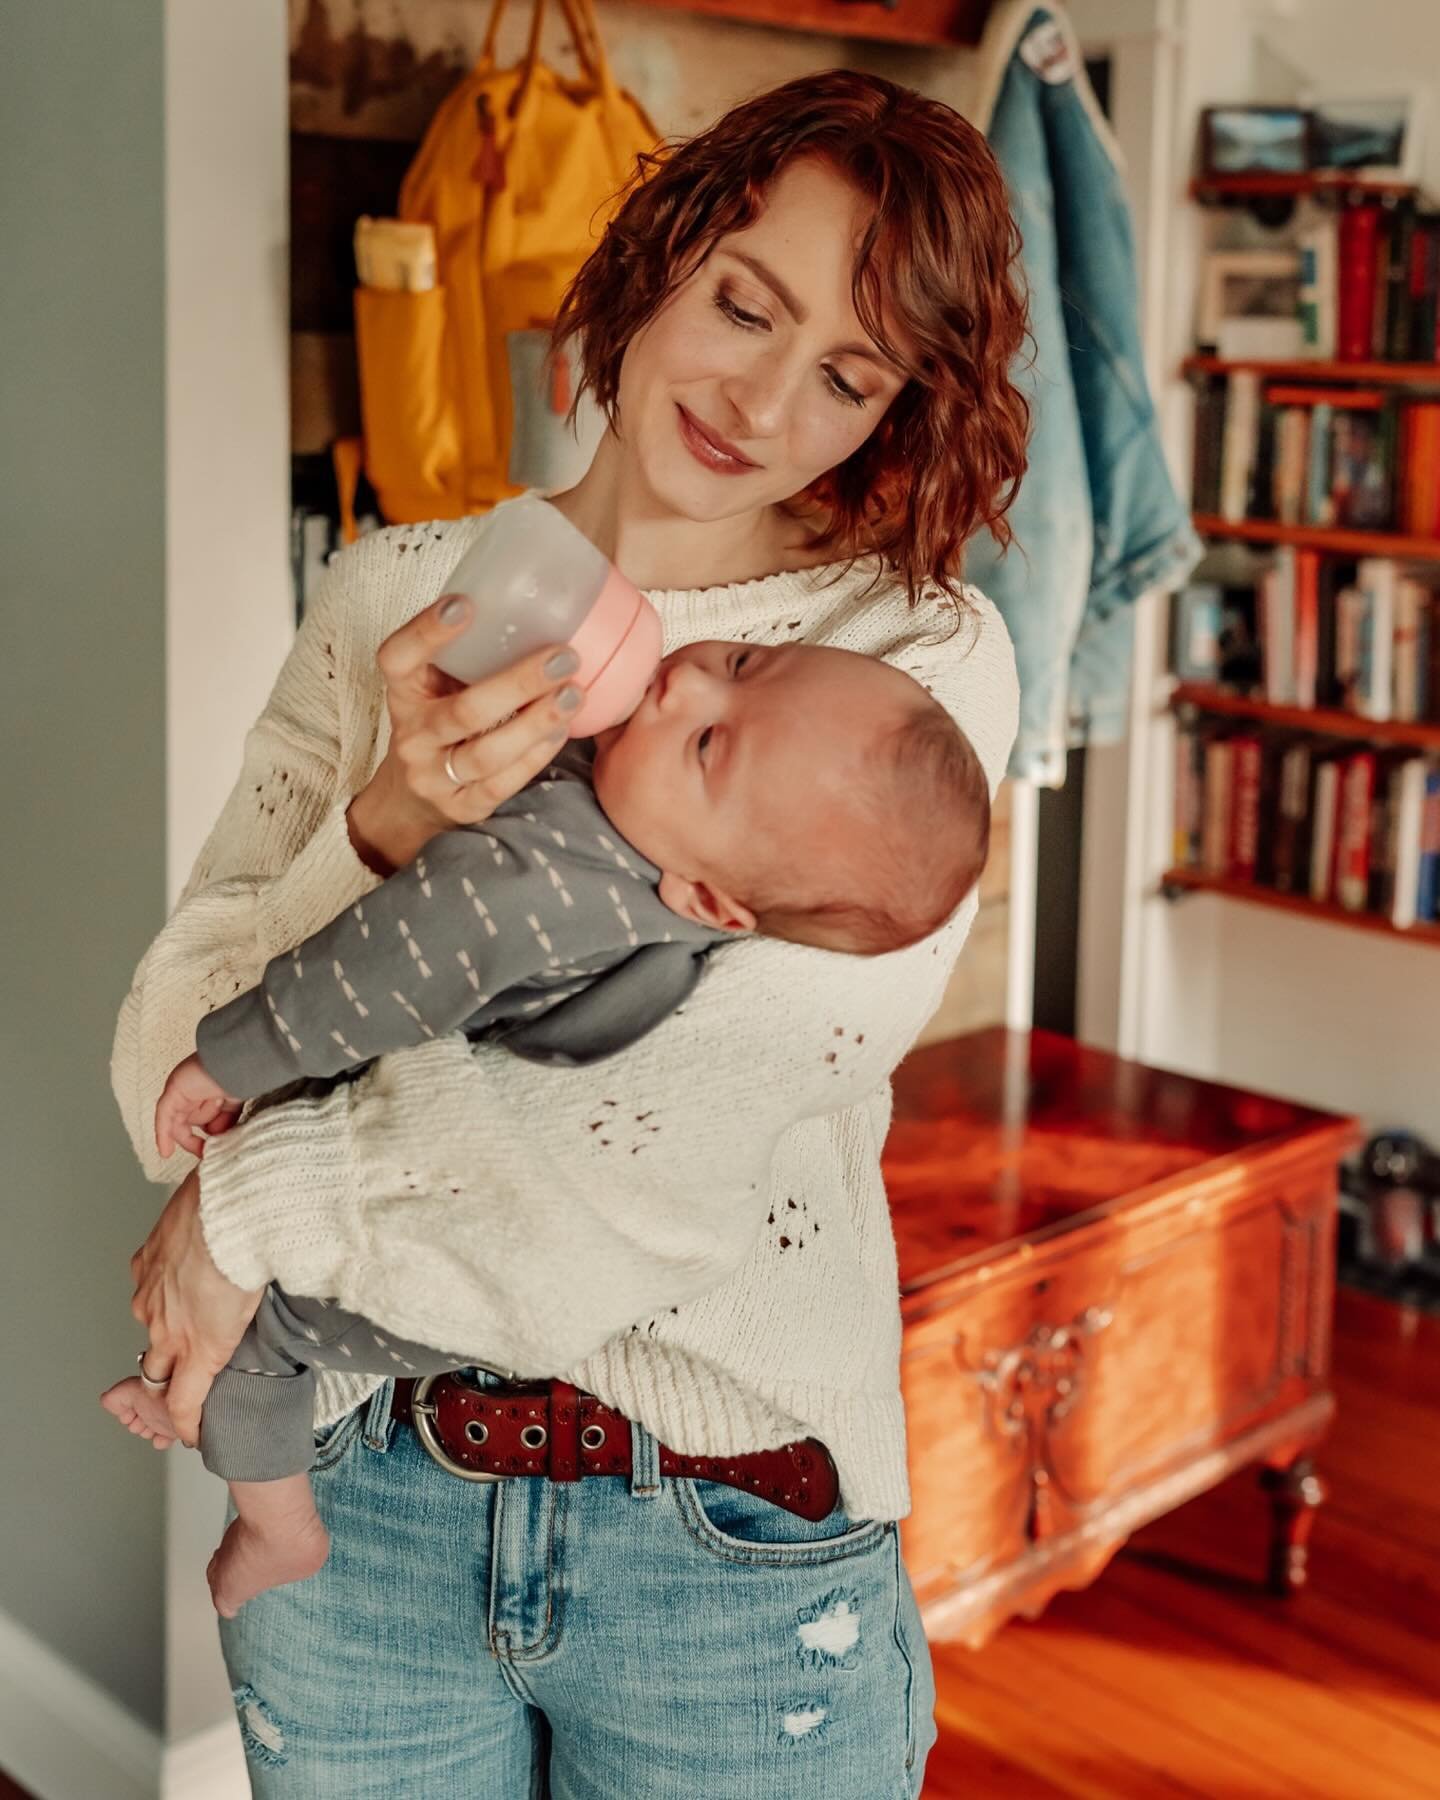 As lovely as outdoors is, I still think that in-home newborn sessions are my favorite. They&rsquo;re just so personal, so cozy, so comfortable. Just put on some music and hang out with your sweet little family. Cuddle, dance, feed the baby. Relax and